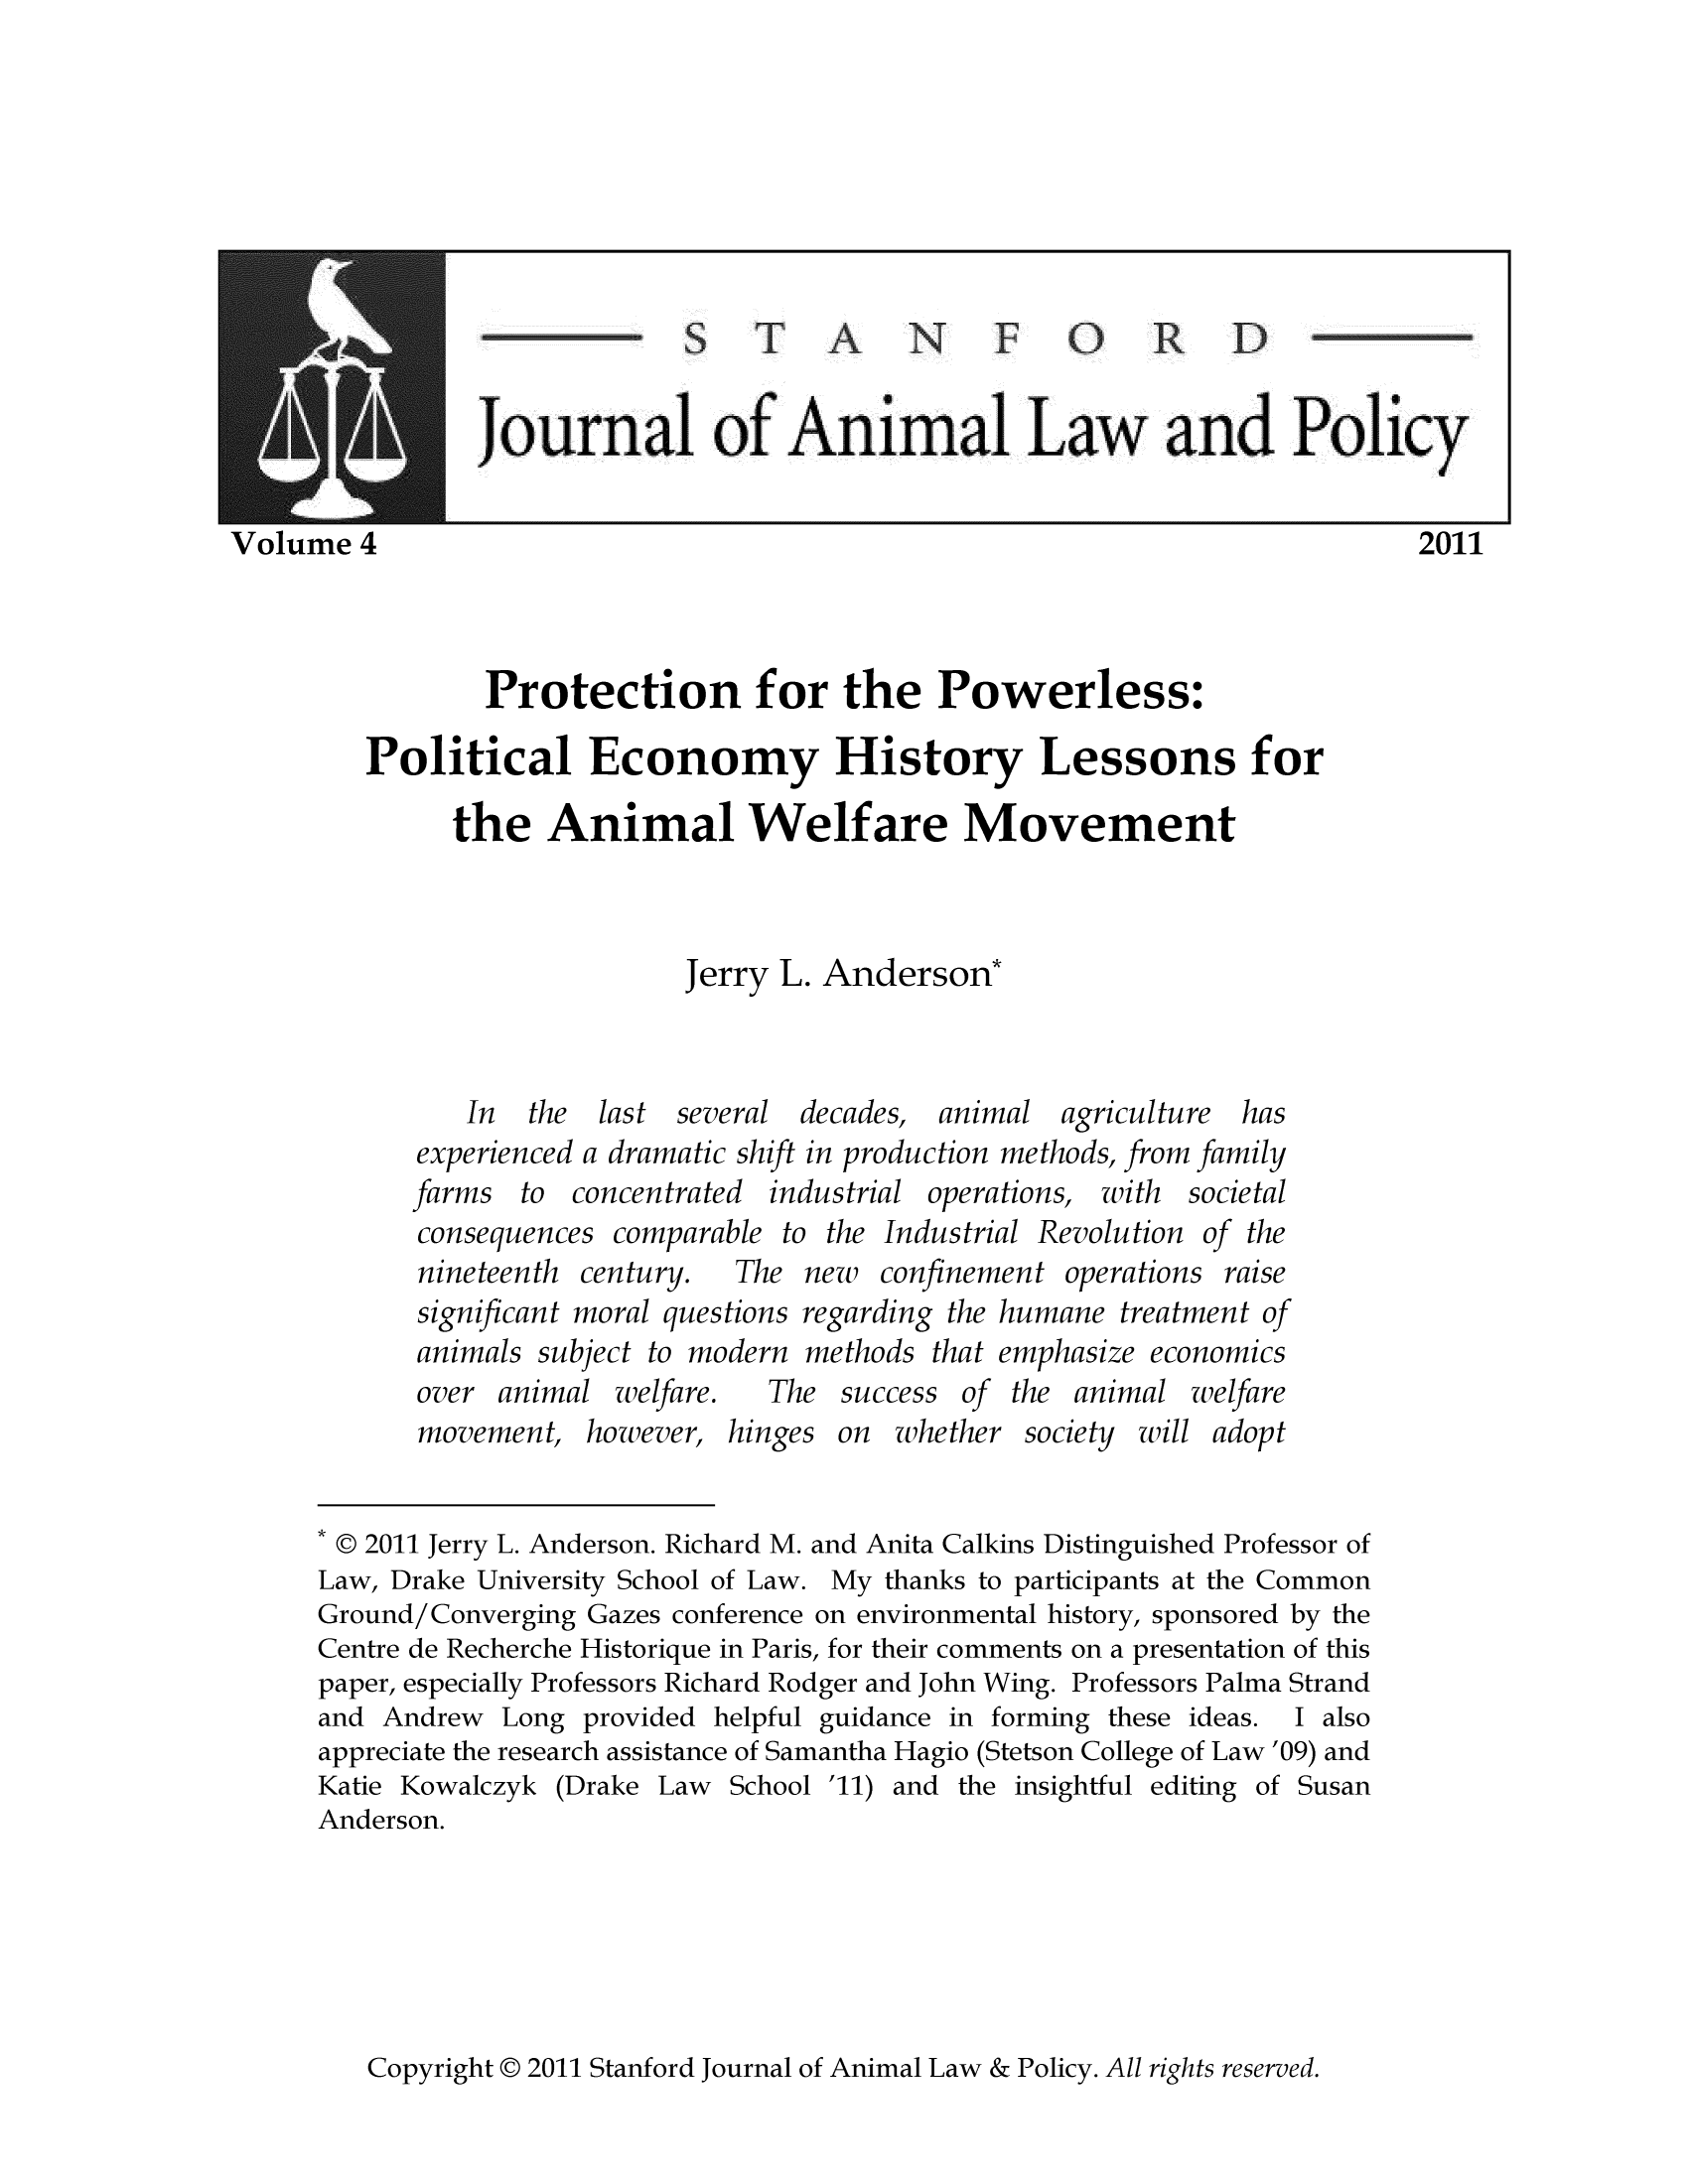 handle is hein.journals/stanilpo4 and id is 1 raw text is: ournal of Animal Law an Policy
me 4                                                                        2011
Protection for the Powerless:
Political Economy History Lessons for
the Animal Welfare Movement
Jerry L. Anderson*
In the last several decades, animal agriculture has
experienced a dramatic shift in production methods, from family
farms to concentrated industrial operations, with societal
consequences comparable to the Industrial Revolution of the
nineteenth century.   The new   confinement operations raise
significant moral questions regarding the humane treatment of
animals subject to modern methods that emphasize economics
over animal welfare.    The success of the animal welfare
movement, however, hinges on whether society will adopt
* © 2011 Jerry L. Anderson. Richard M. and Anita Calkins Distinguished Professor of
Law, Drake University School of Law. My thanks to participants at the Common
Ground/Converging Gazes conference on environmental history, sponsored by the
Centre de Recherche Historique in Paris, for their comments on a presentation of this
paper, especially Professors Richard Rodger and John Wing. Professors Palma Strand
and Andrew Long provided helpful guidance in forming these ideas.  I also
appreciate the research assistance of Samantha Hagio (Stetson College of Law '09) and
Katie Kowalczyk (Drake Law School '11) and the insightful editing of Susan
Anderson.

Copyright @ 2011 Stanford Journal of Animal Law & Policy. All rights reserved.


